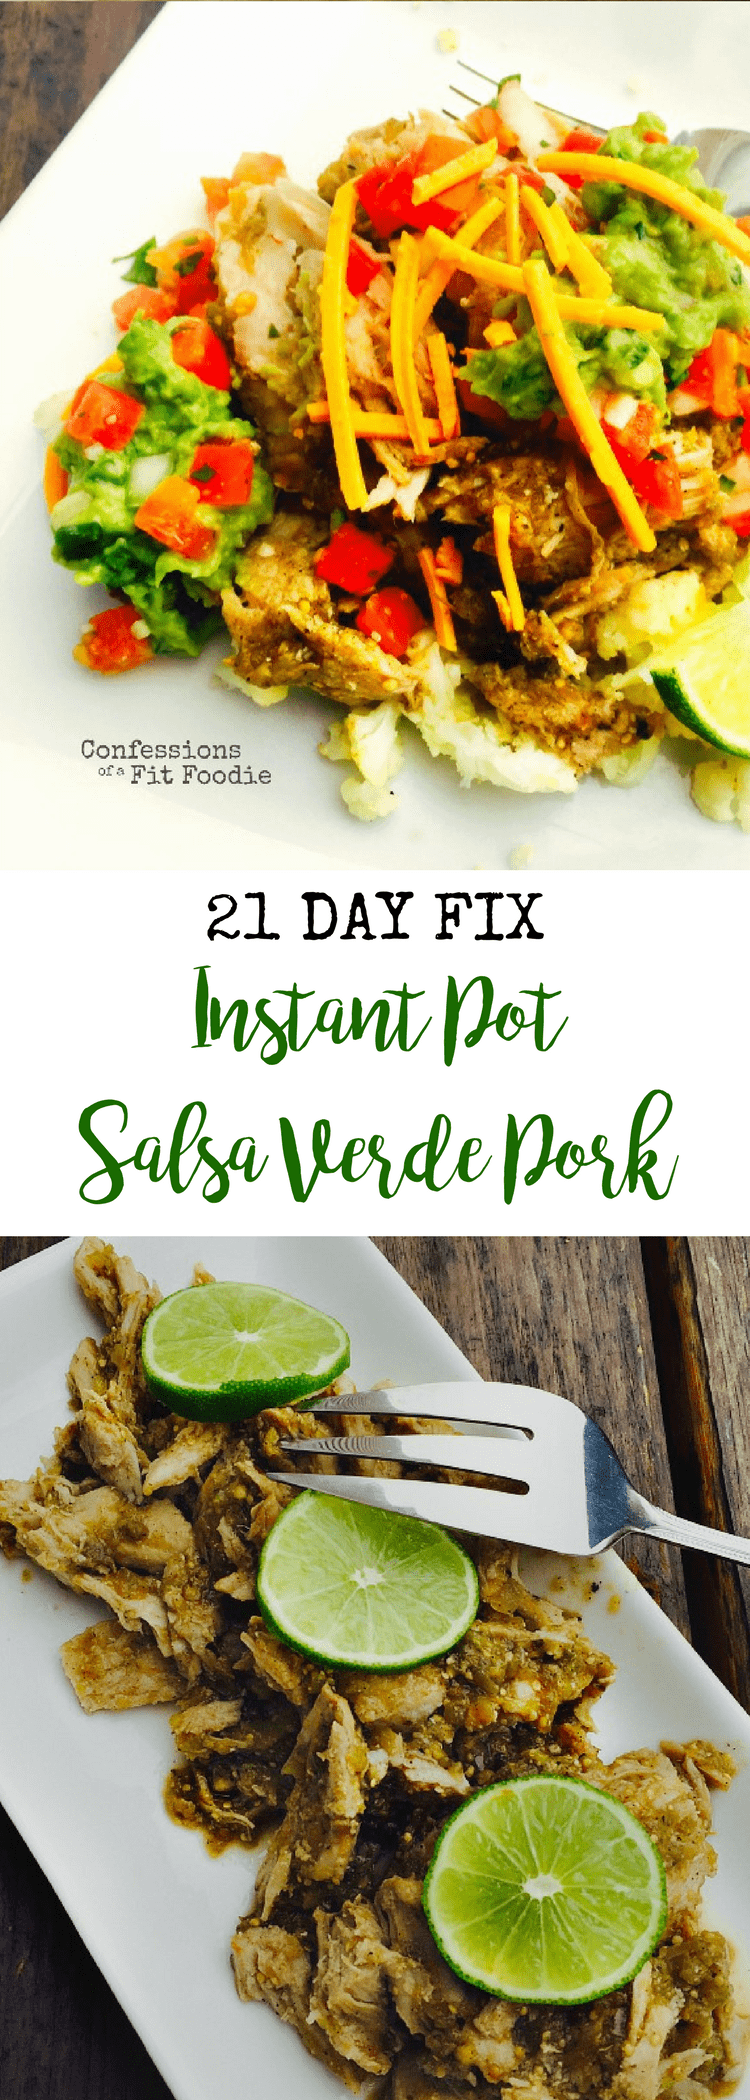 21 Day Fix Salsa Verde Pork {Slow Cooker/Instant Pot} | Confessions of a Fit Foodie 